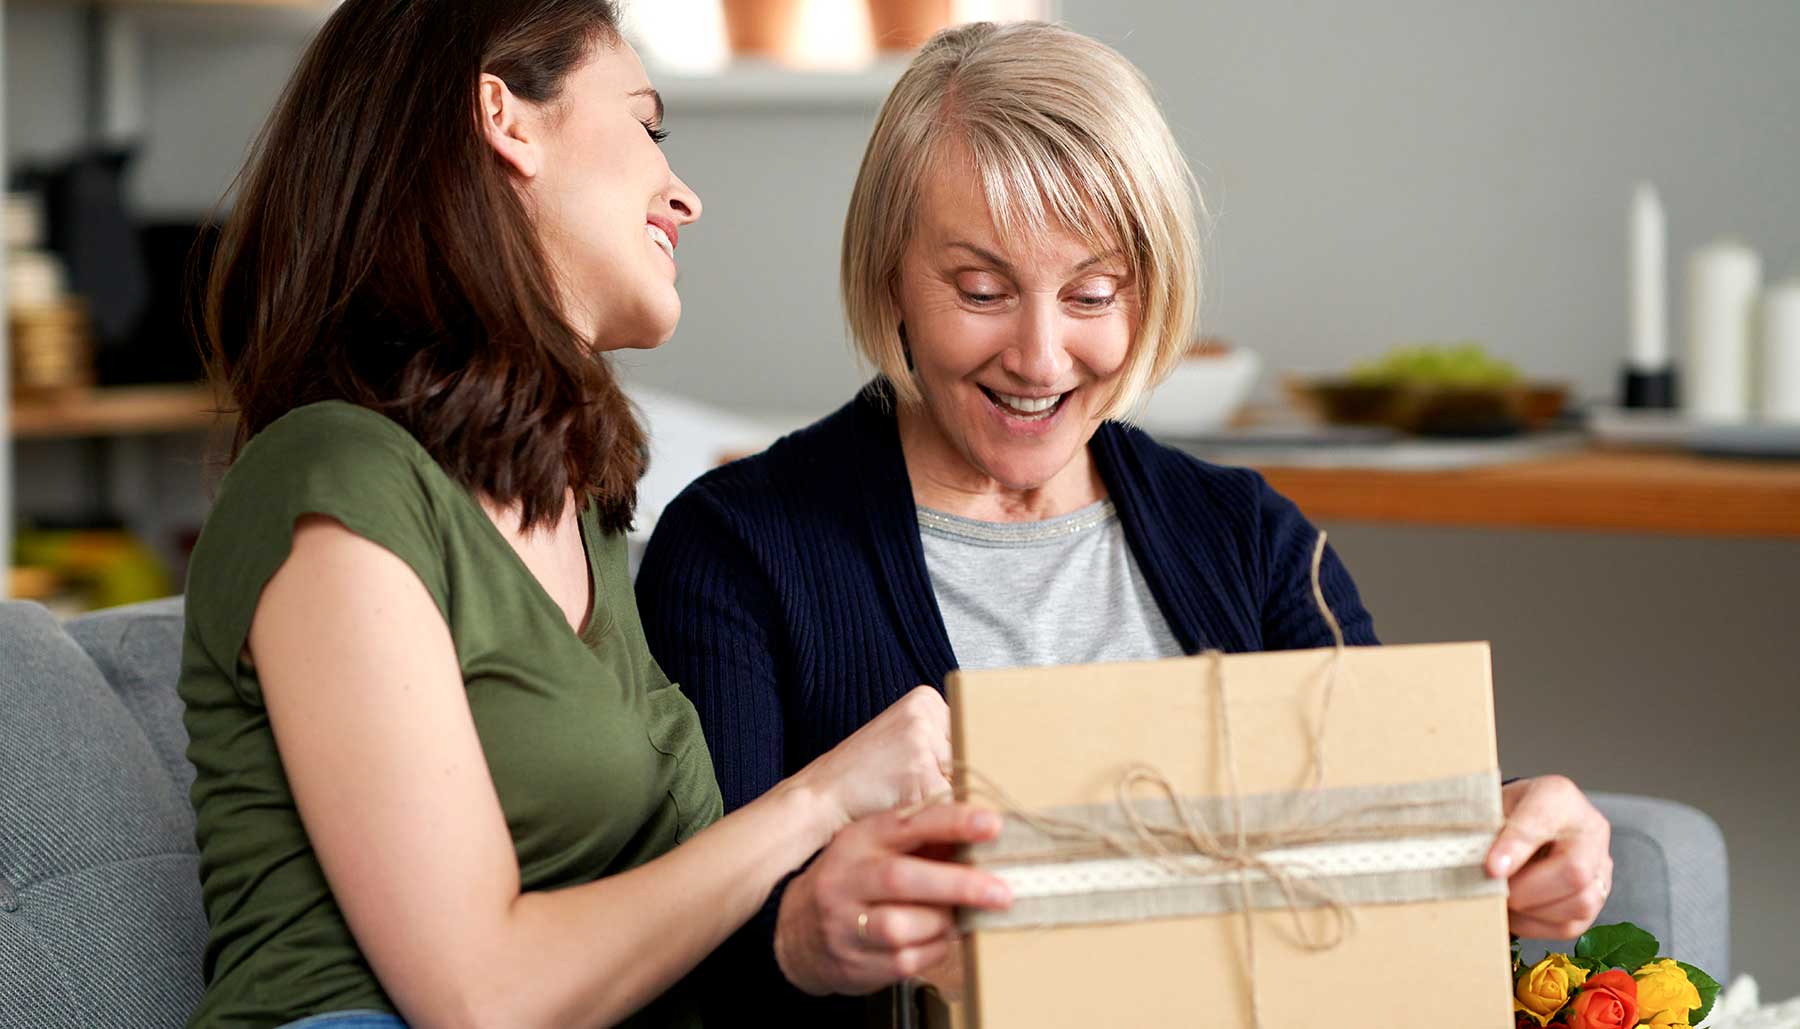 woman opening a gift from her adult daughter